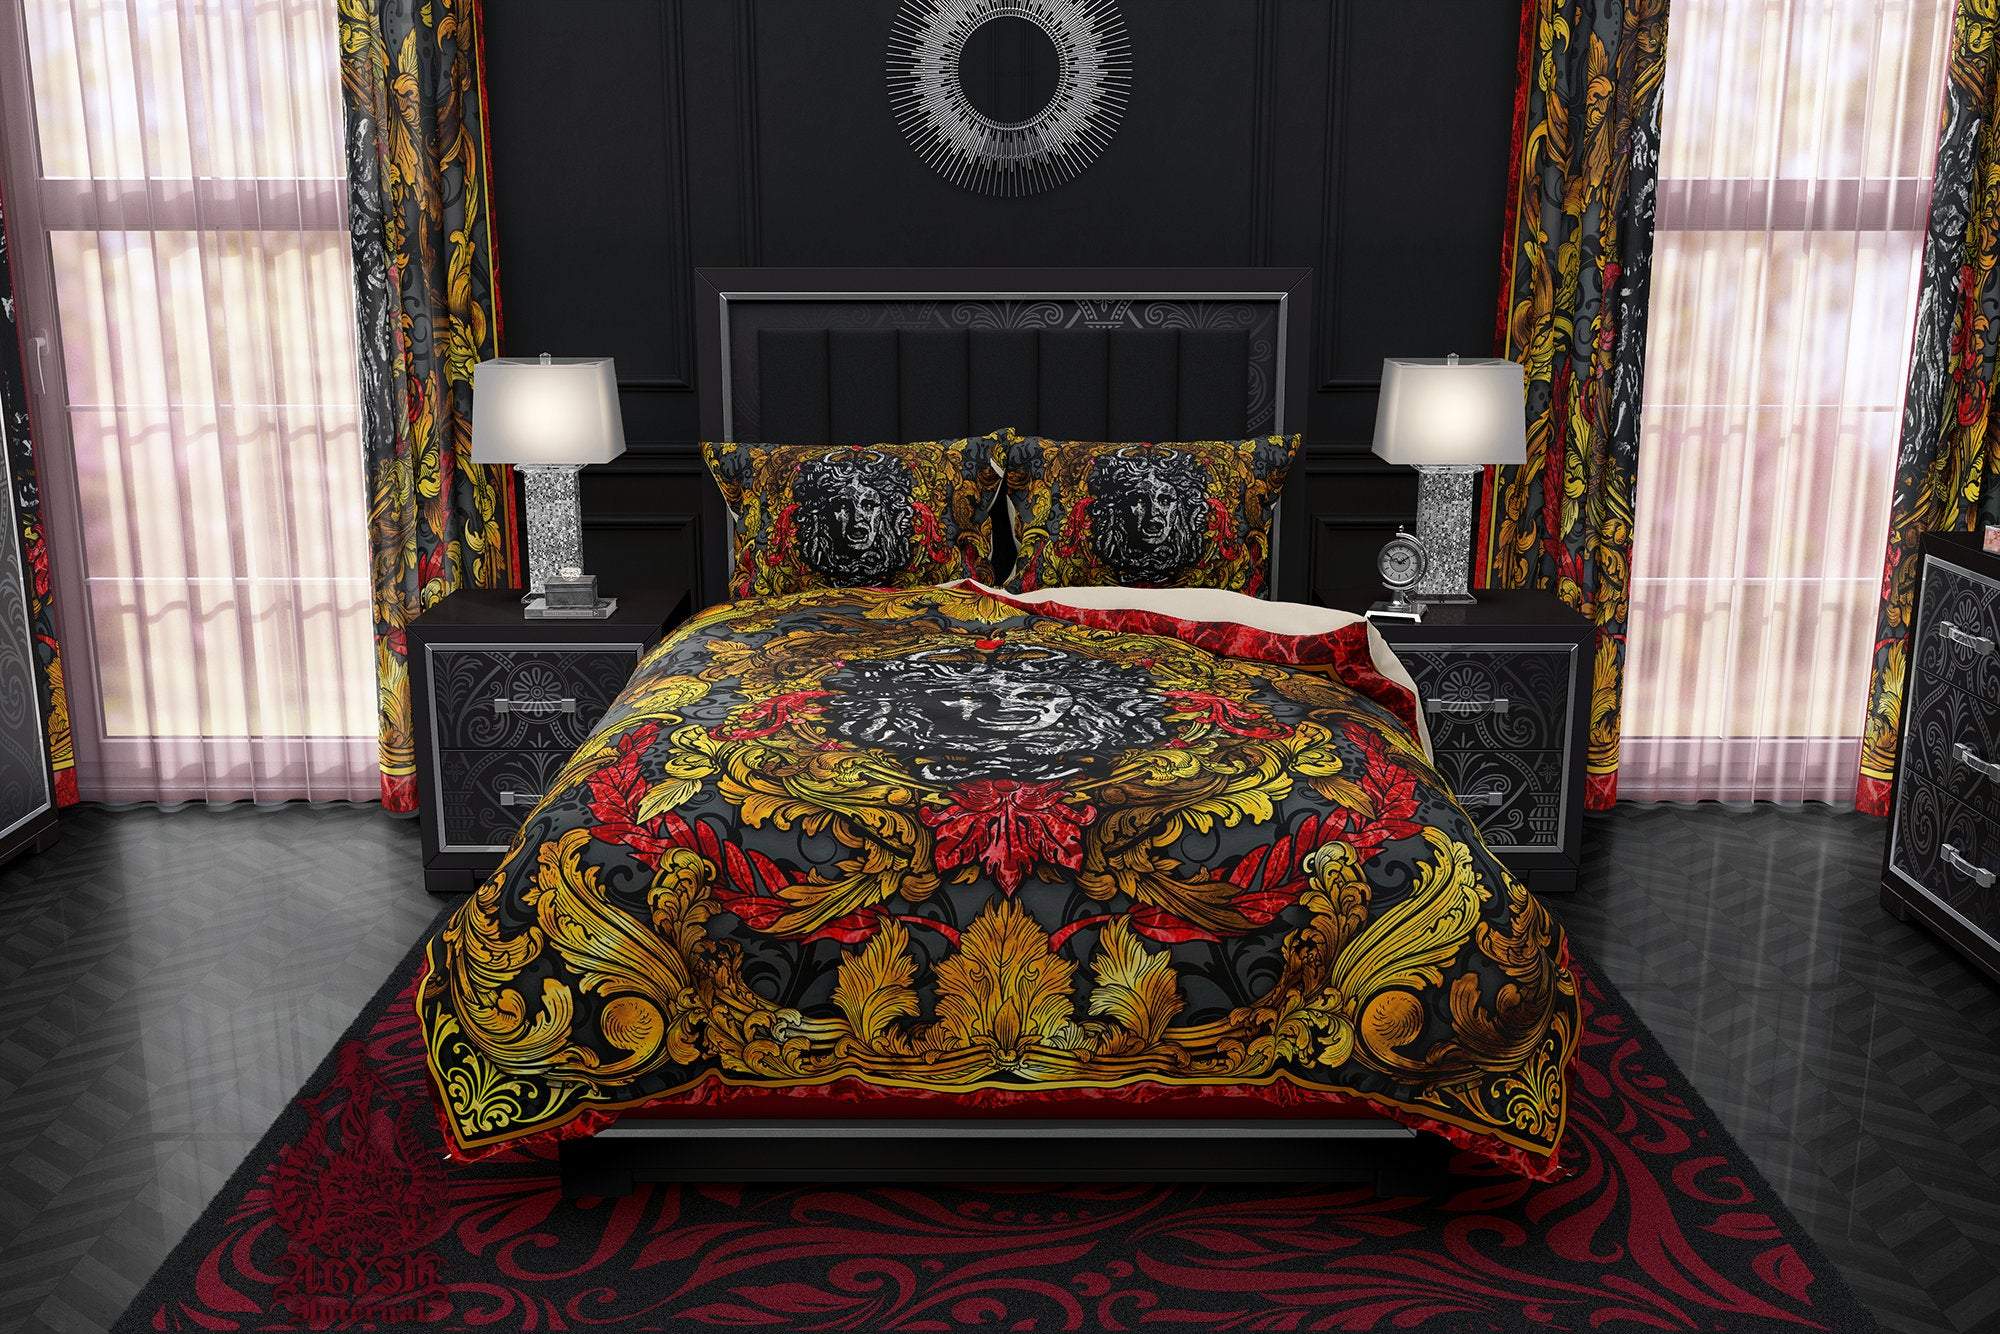 Vintage Bedding Set, Comforter and Duvet, Baroque and Alternative Bed Cover and Bedroom Decor, King, Queen and Twin Size - Medusa - Abysm Internal